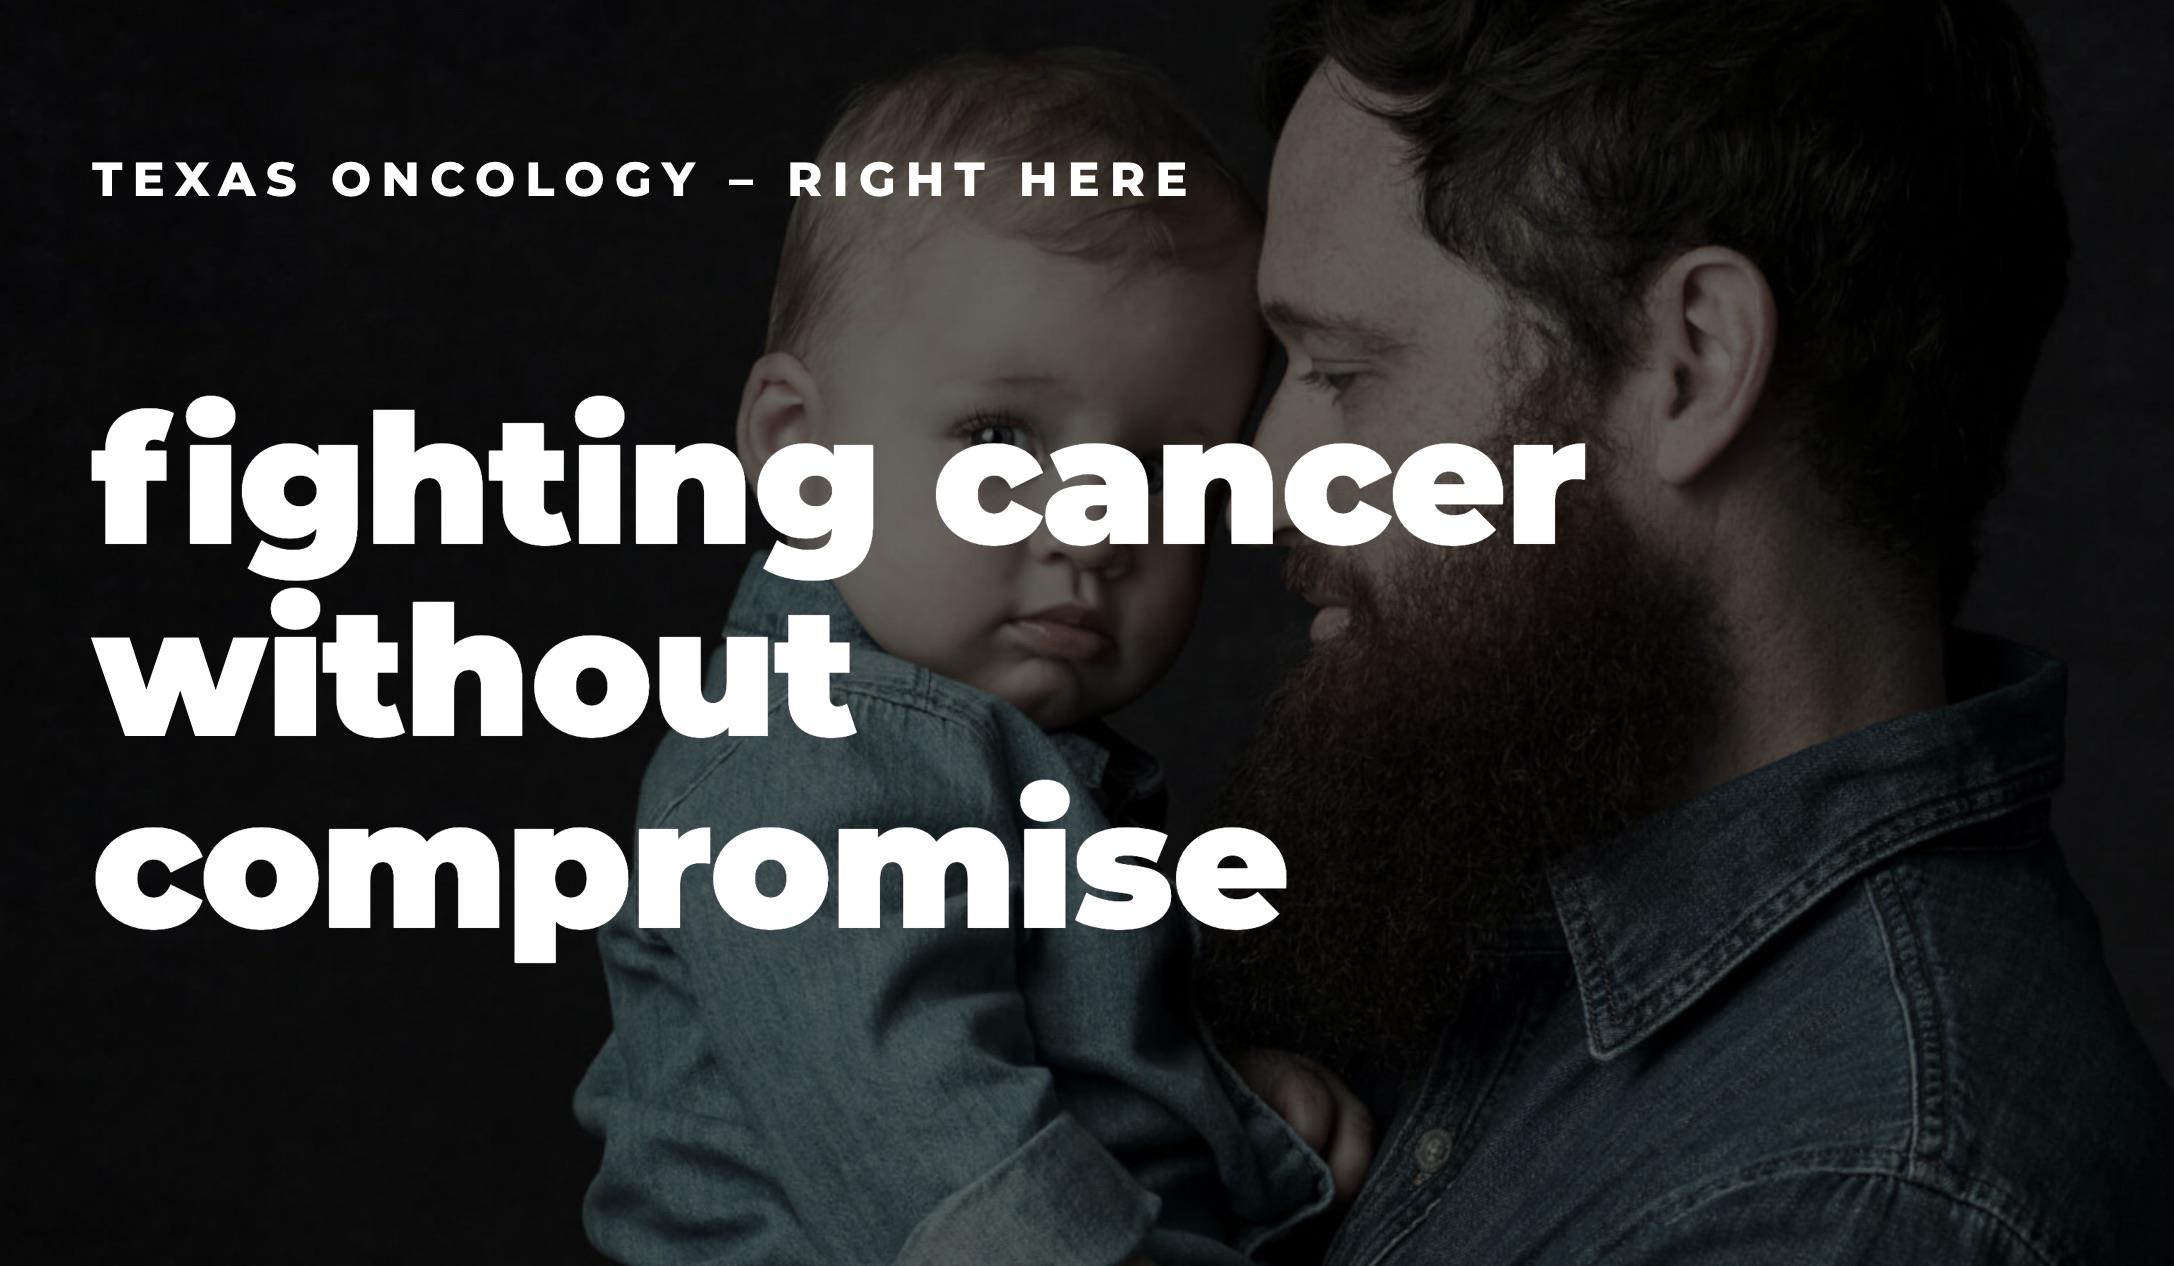 Texas Oncology—Fighting Cancer Without Compromise